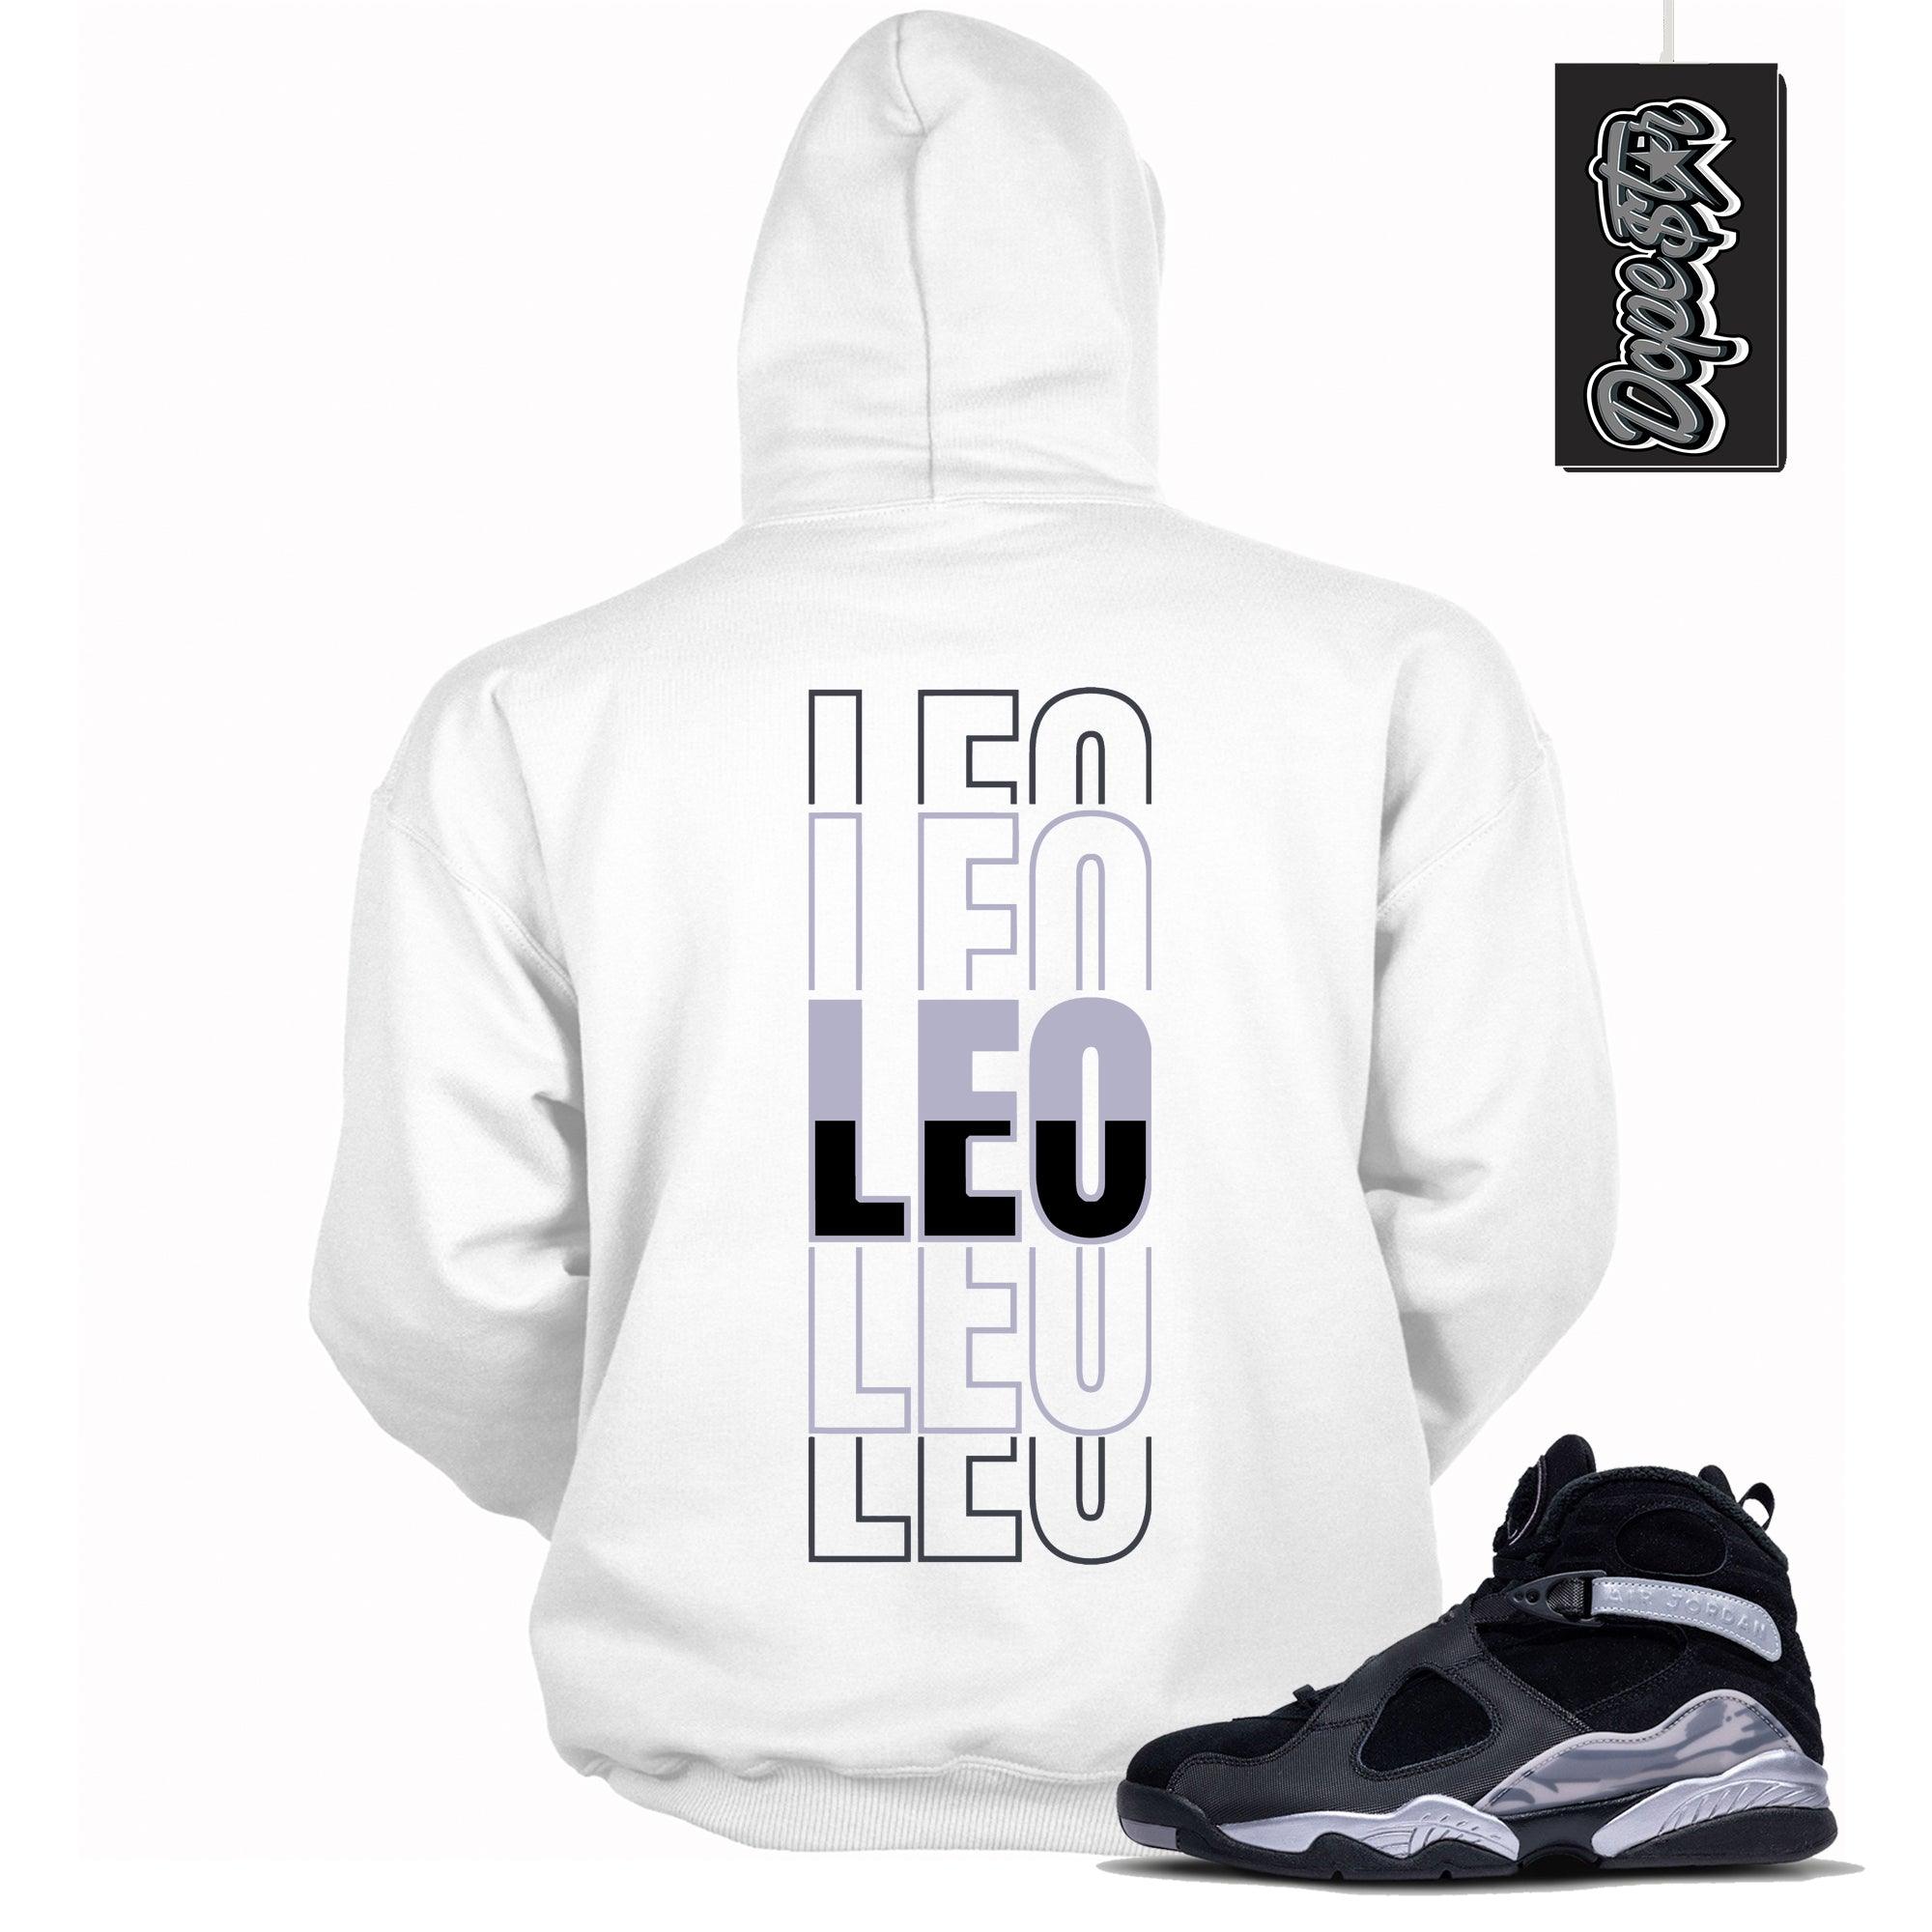 Cool White Graphic Hoodie with “ LEO “ print, that perfectly matches Air Jordan 8 Winterized  sneakers